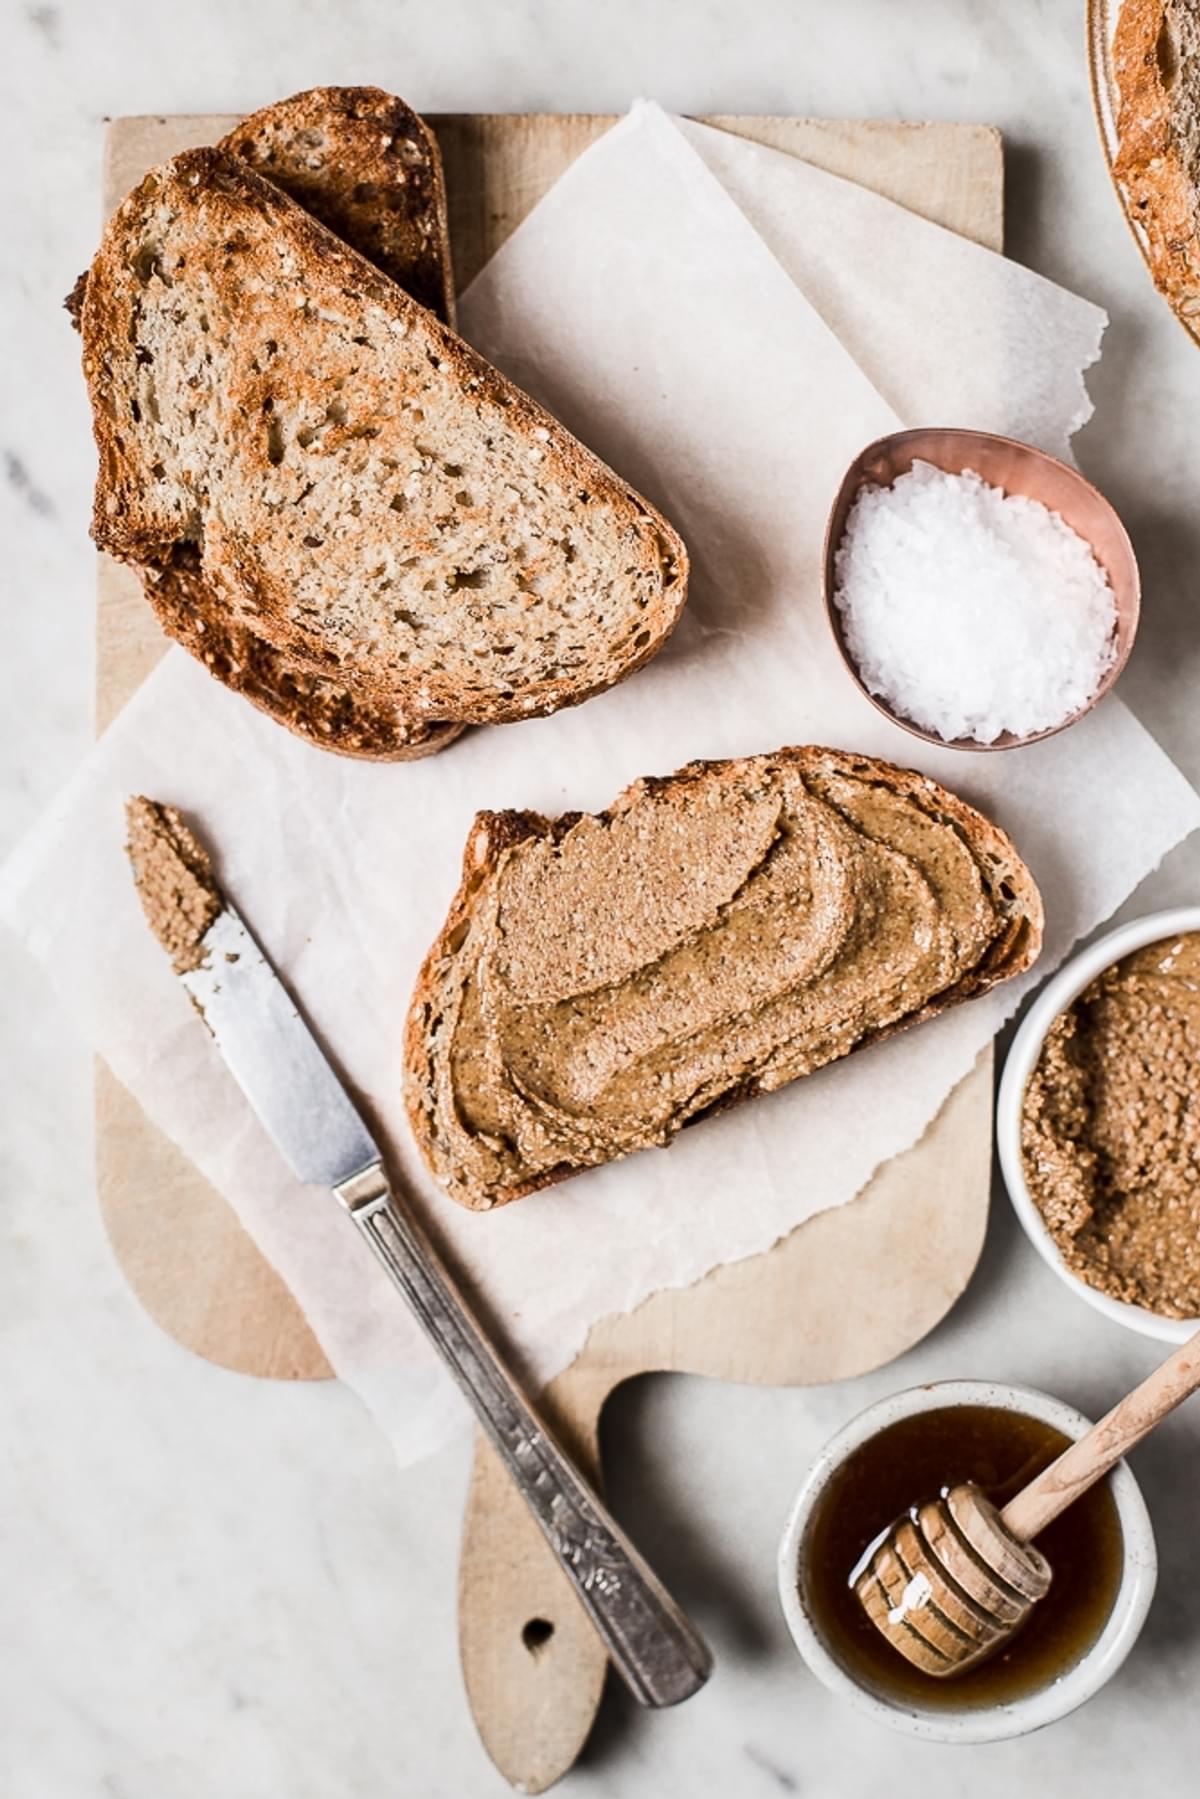 A slice of toasted bread spread with almond butter. Next to a bowl of honey, flakey salt and a knife.